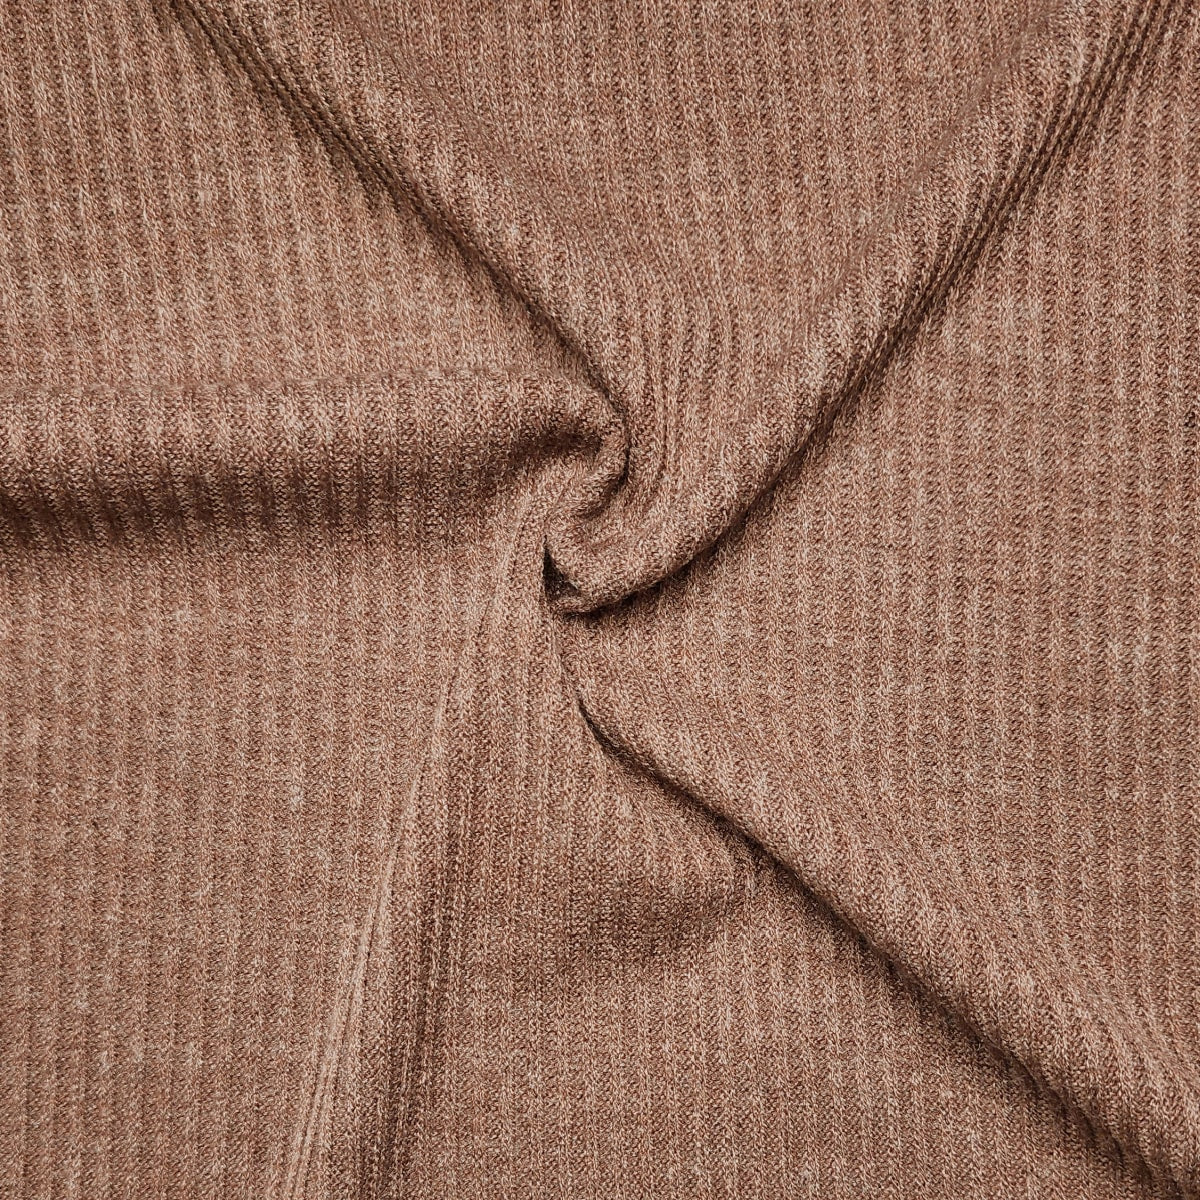 Ribbed Knit Fabric Chocolate